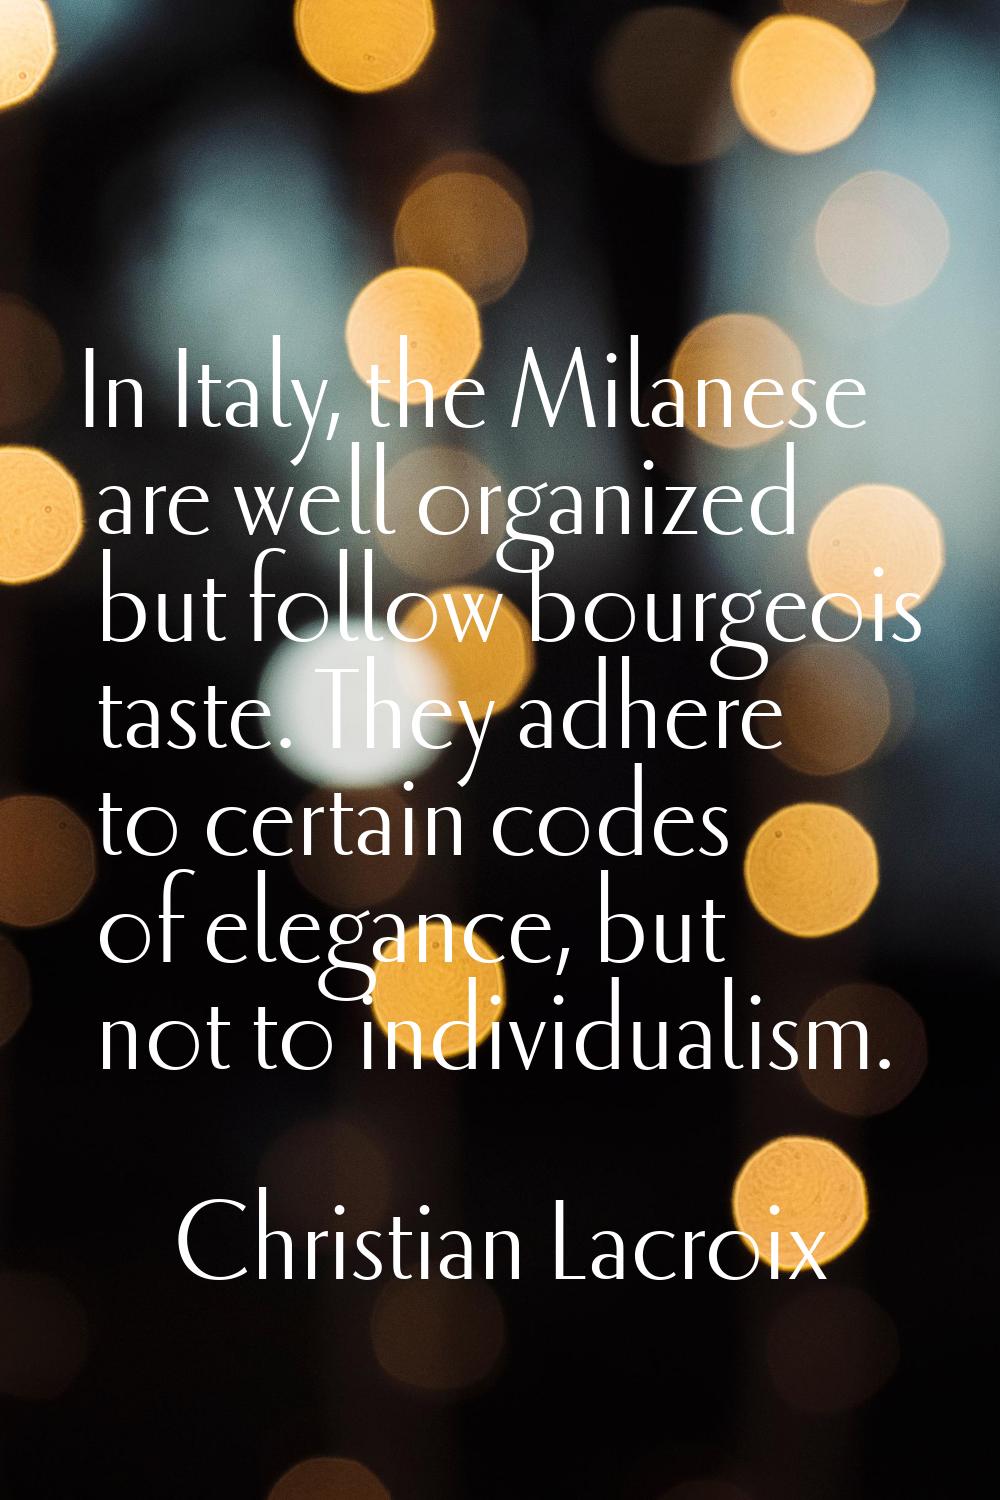 In Italy, the Milanese are well organized but follow bourgeois taste. They adhere to certain codes 